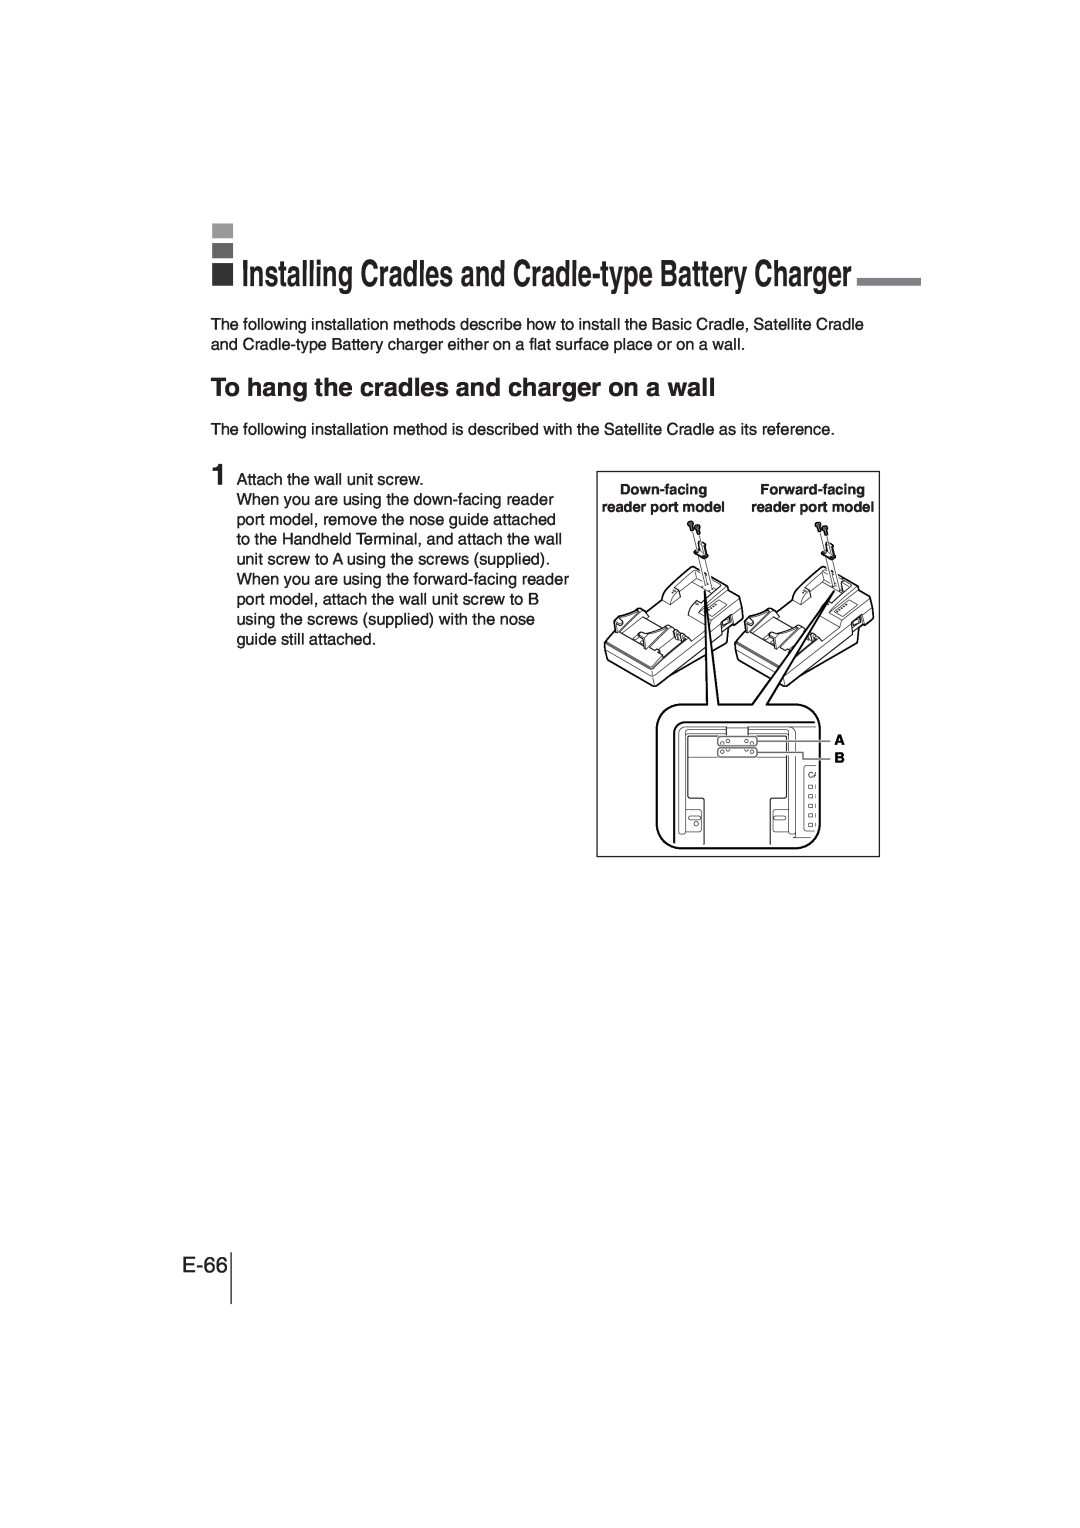 Casio DT-930 manual Installing Cradles and Cradle-typeBattery Charger, To hang the cradles and charger on a wall, E-66 